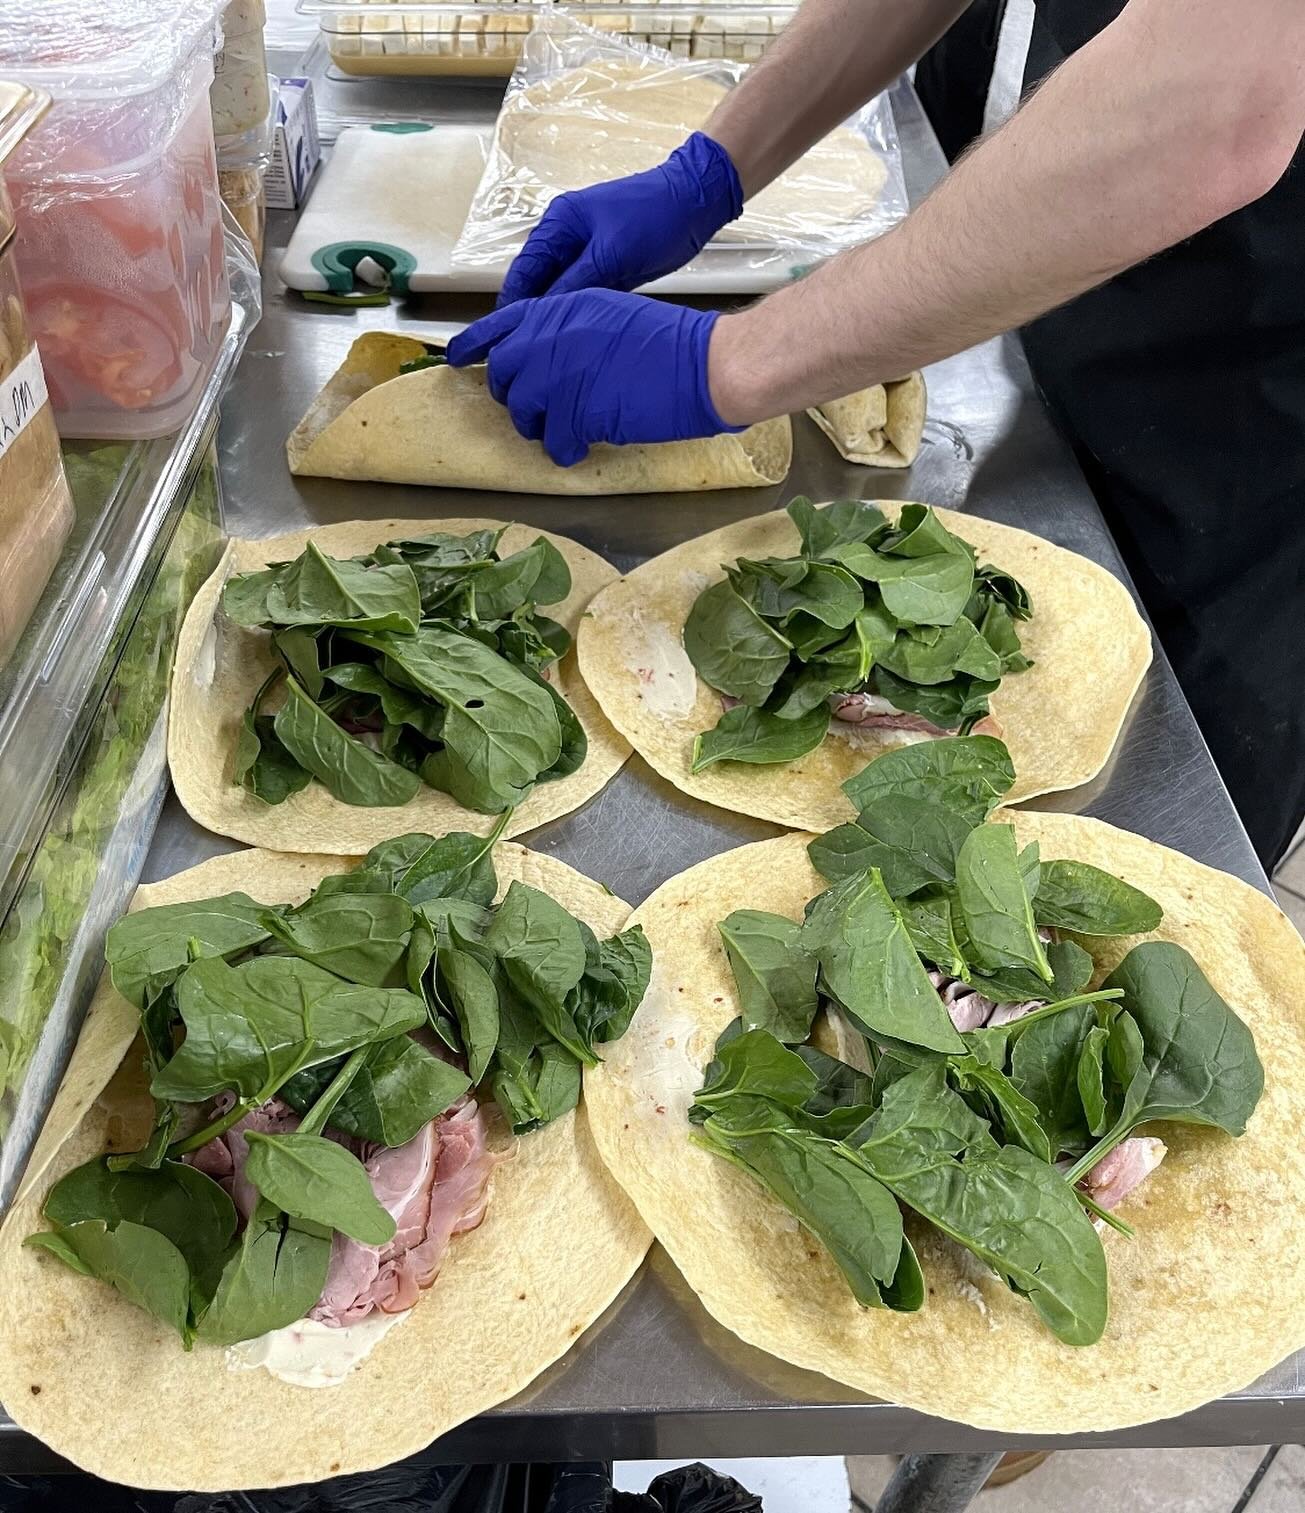 And that&rsquo;s a wrap! Actually, that&rsquo;s a lot of wraps, and we got loads! Grab a wrap on the go today, we&rsquo;re doing a special - all wraps are $1 off through end of day! While supplies last.